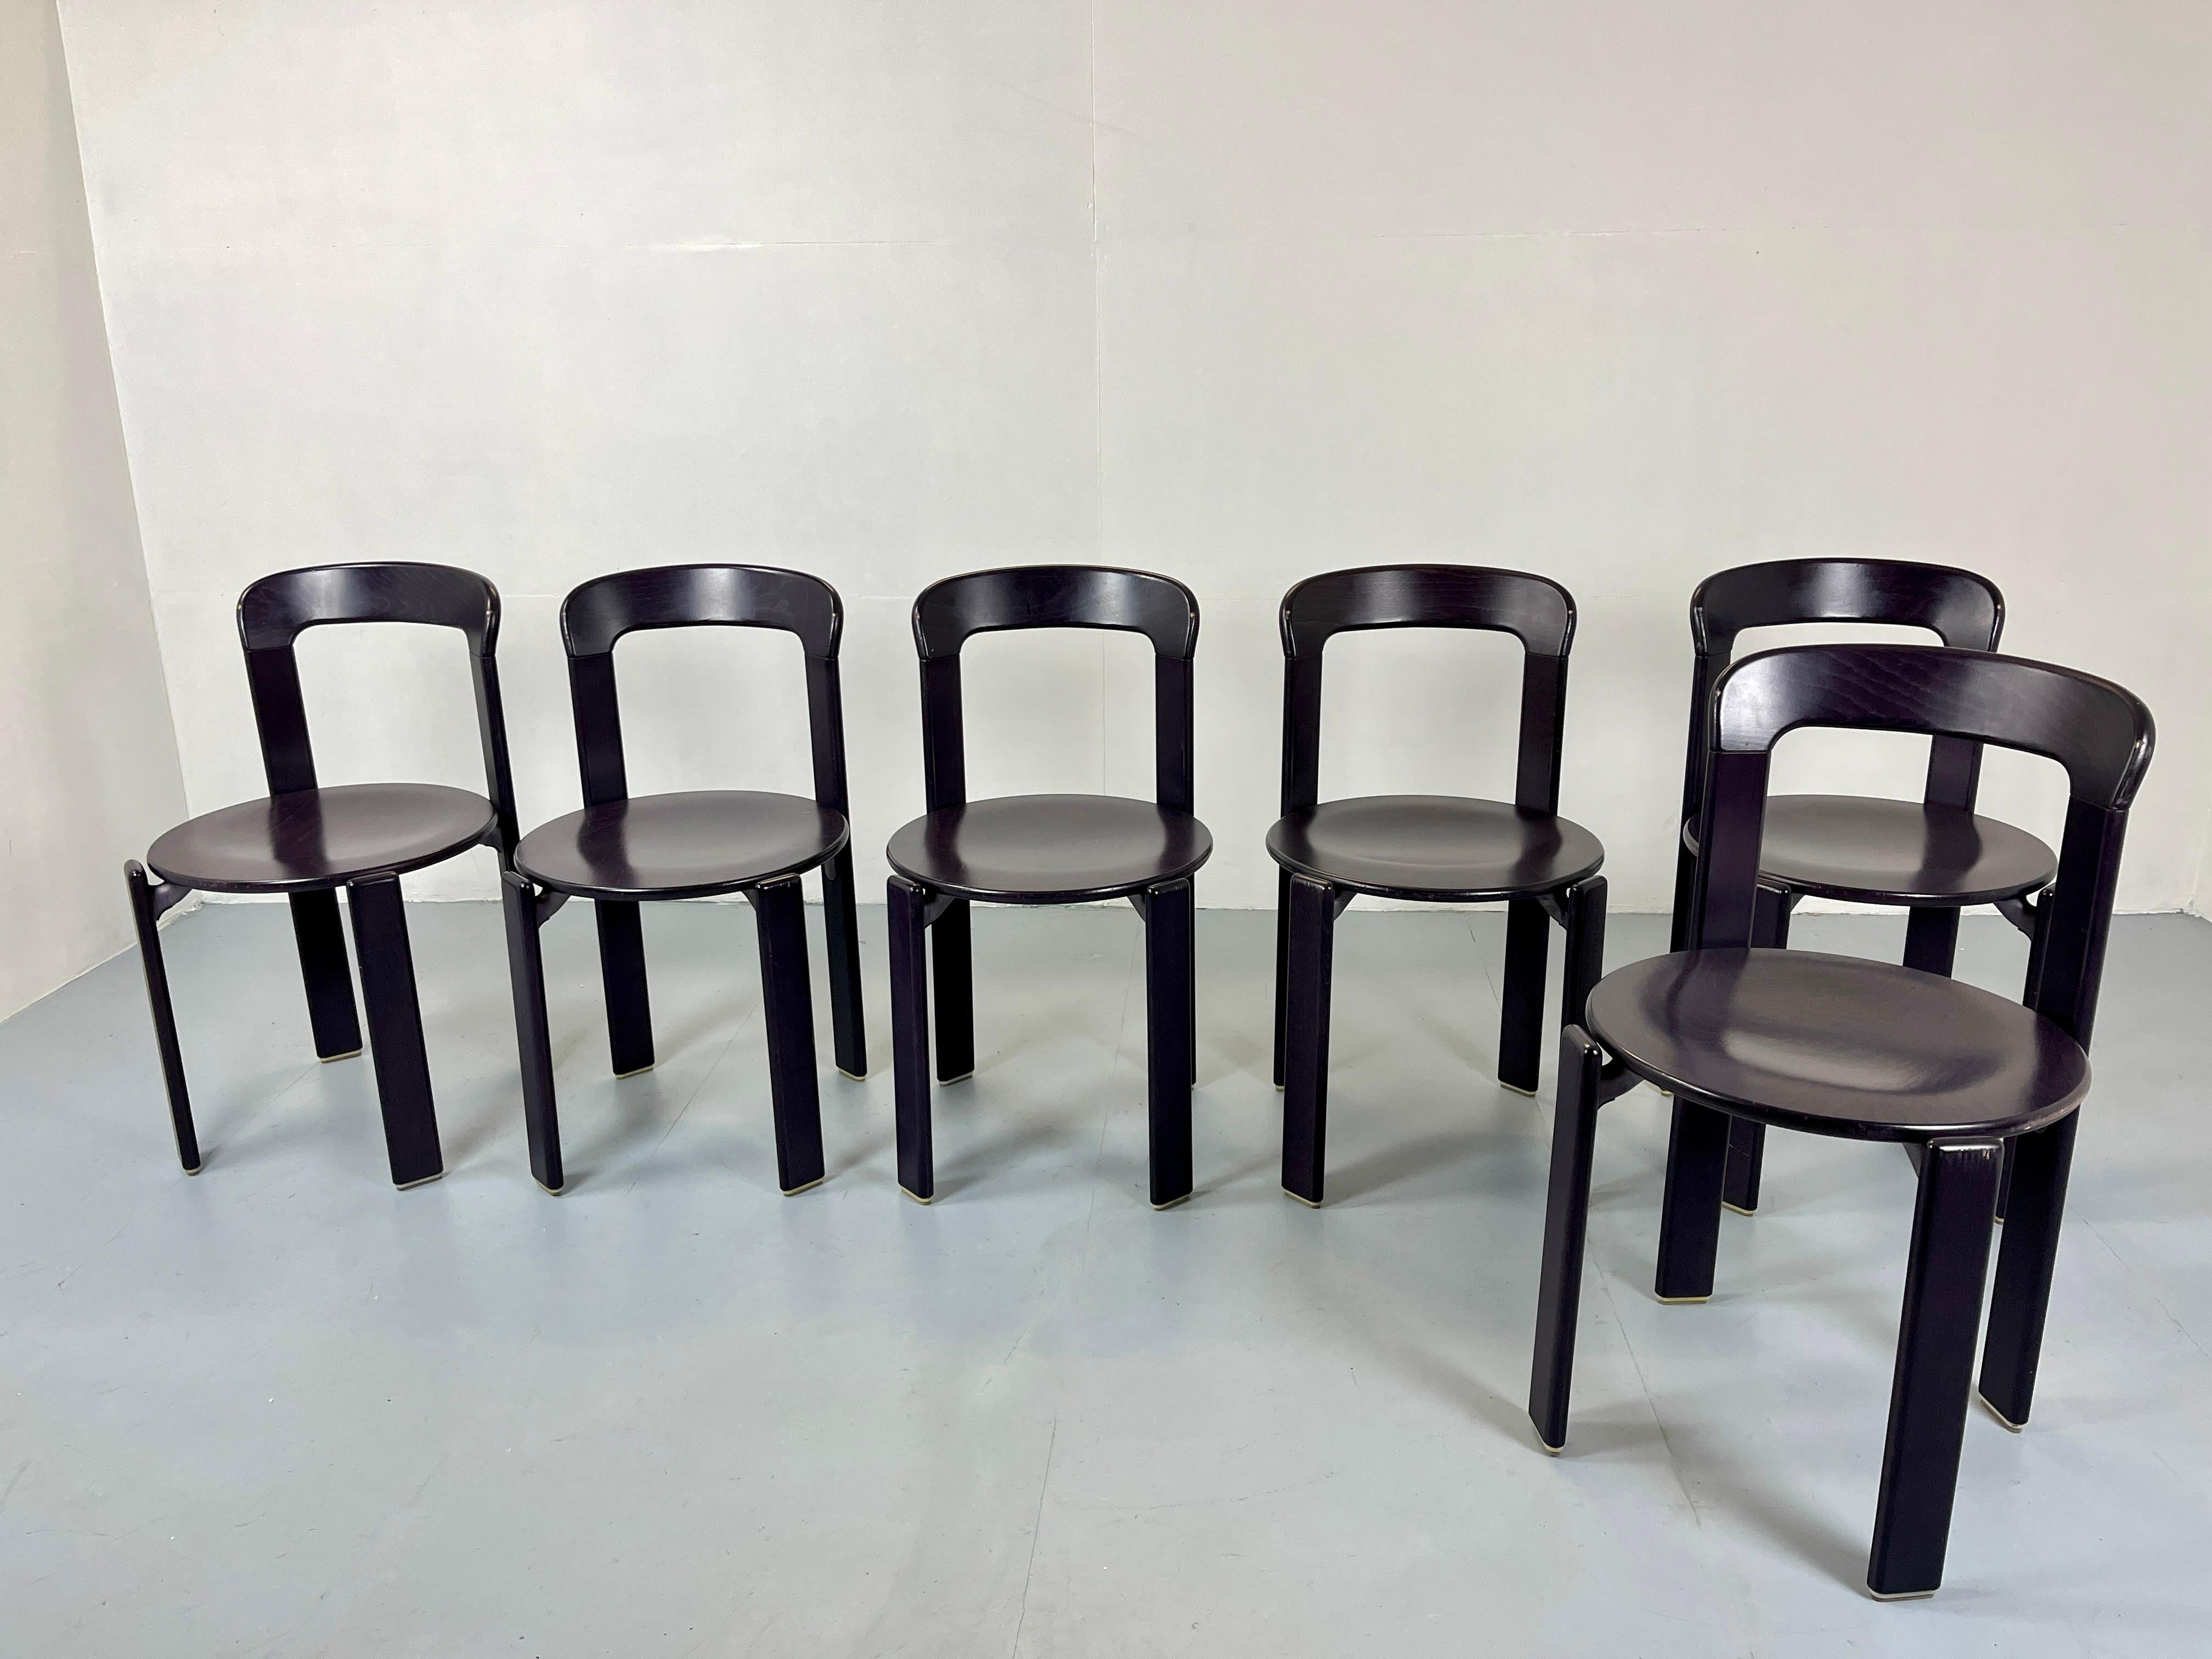 Late 20th Century Vintage Bruno Rey Chairs by Kusch Co. in Eggplant / Violett, 1970s